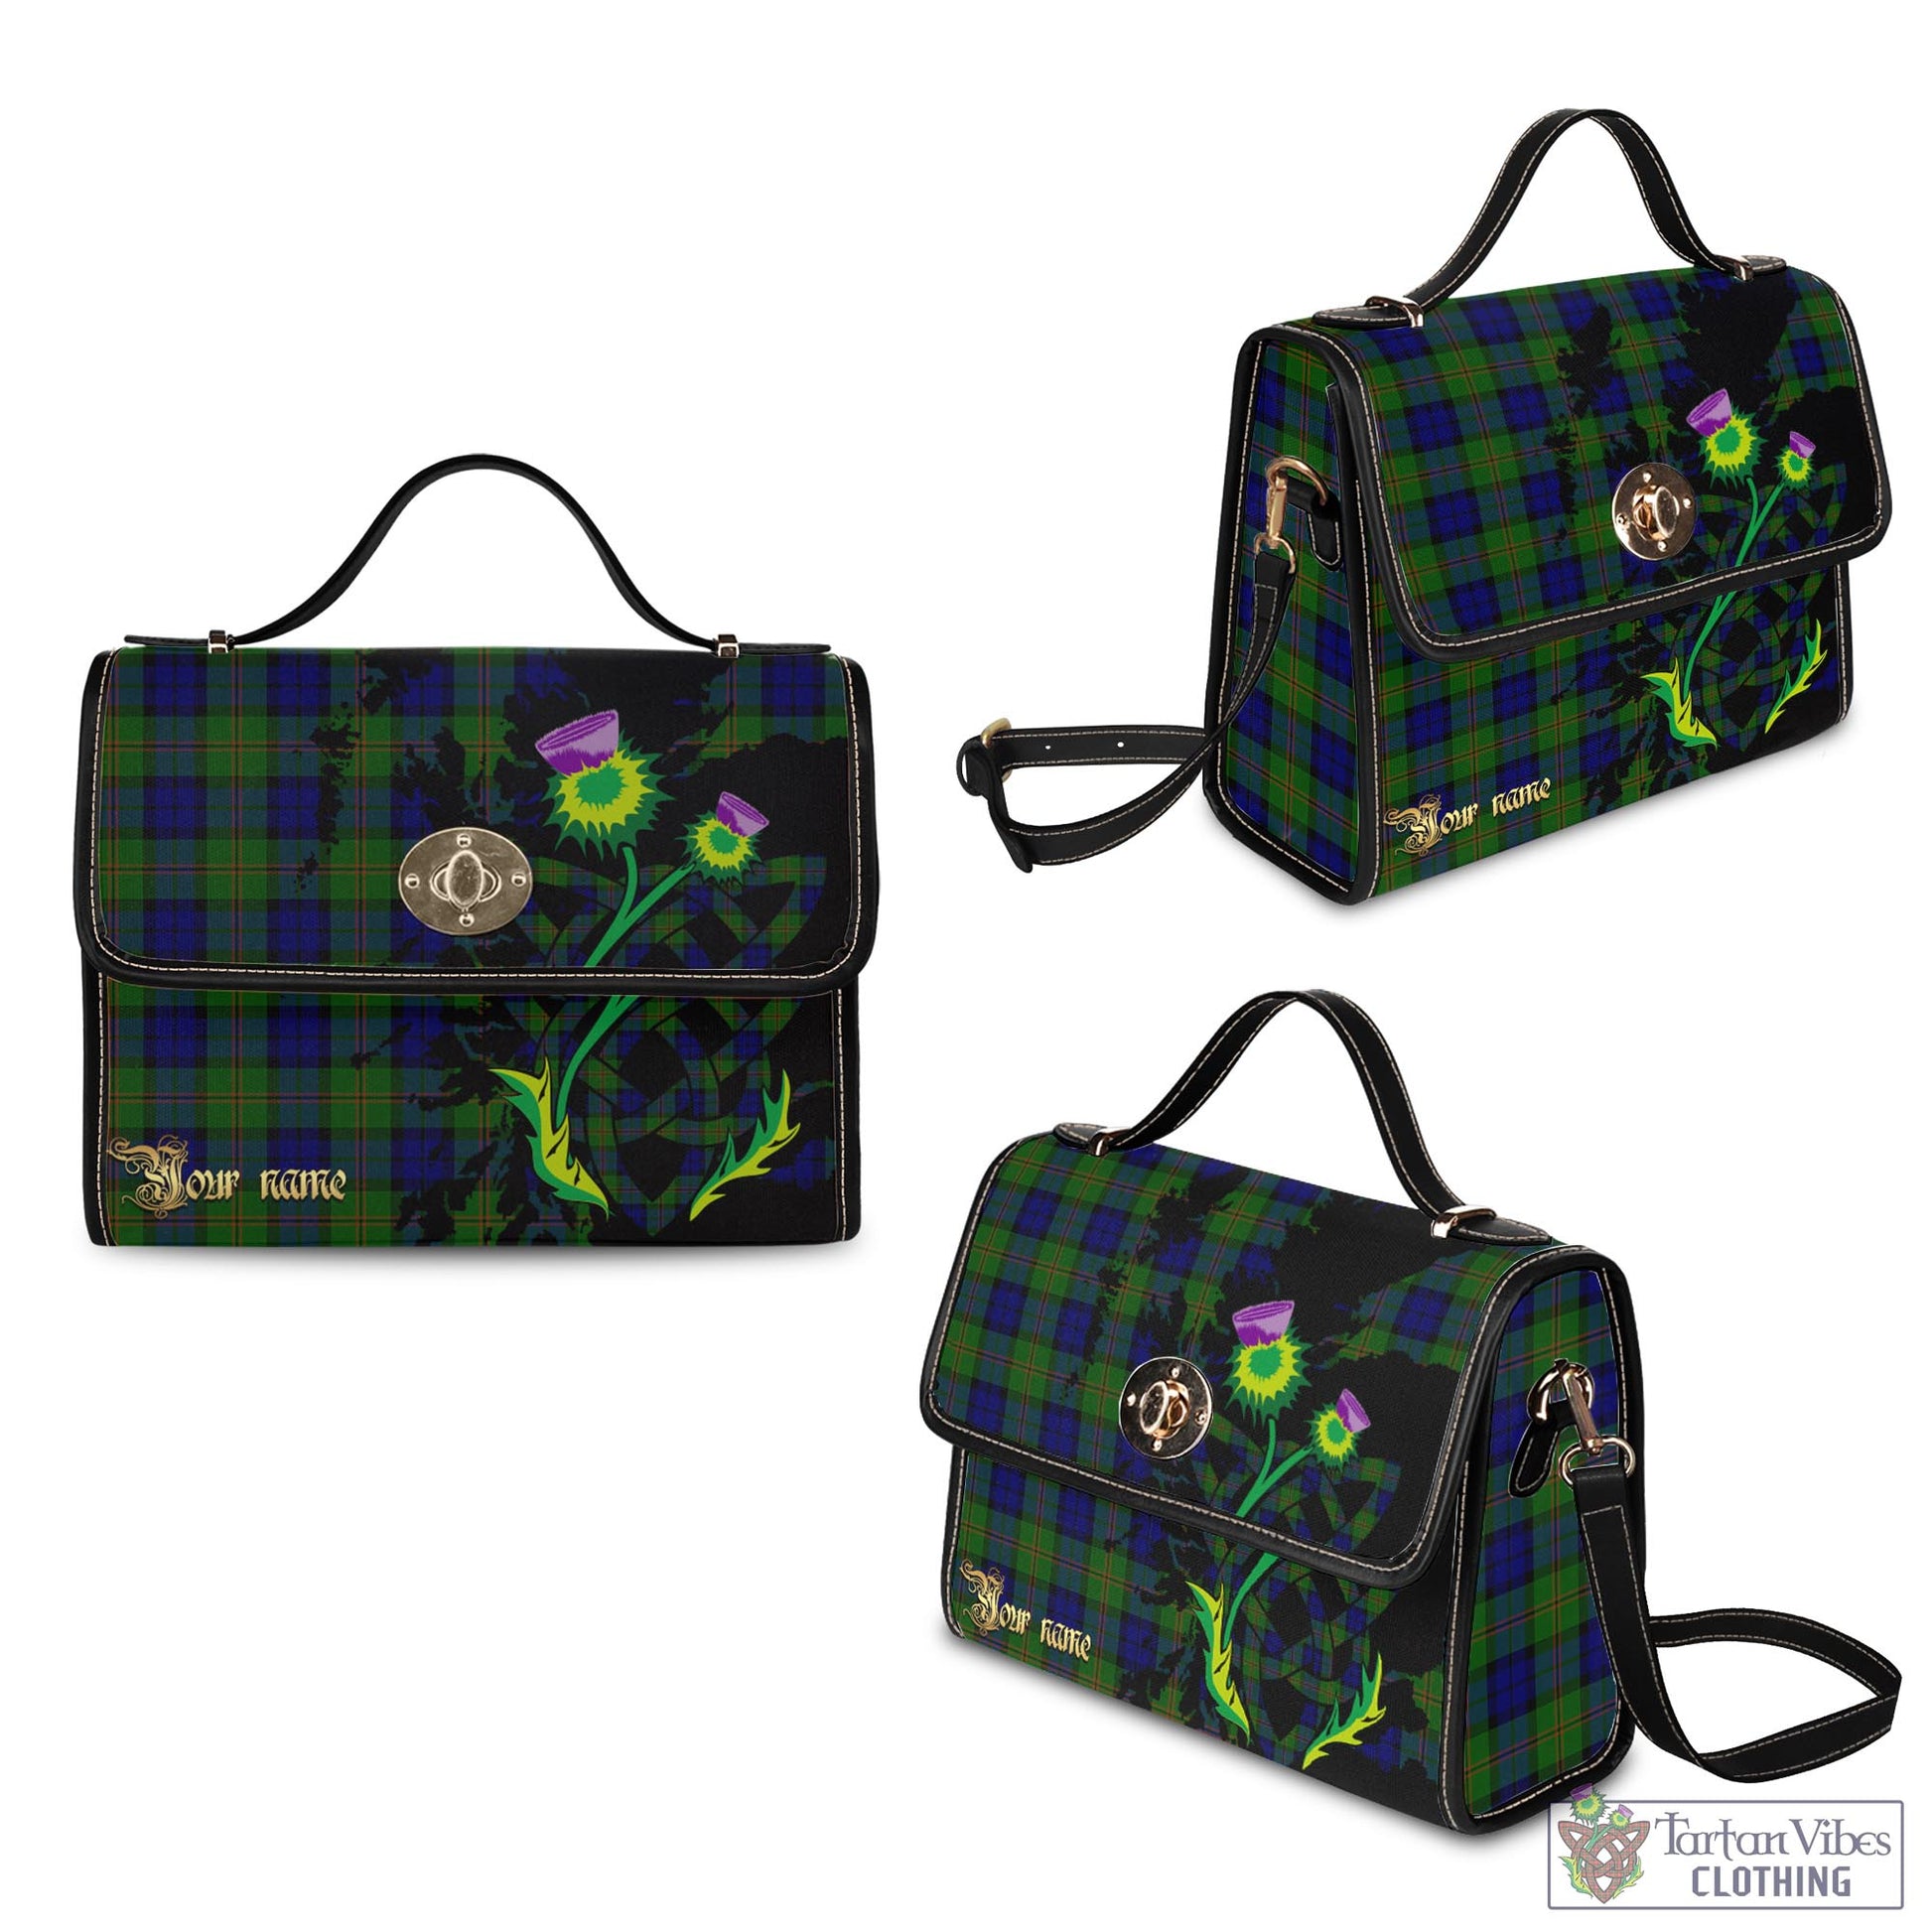 Tartan Vibes Clothing Dundas Modern Tartan Waterproof Canvas Bag with Scotland Map and Thistle Celtic Accents